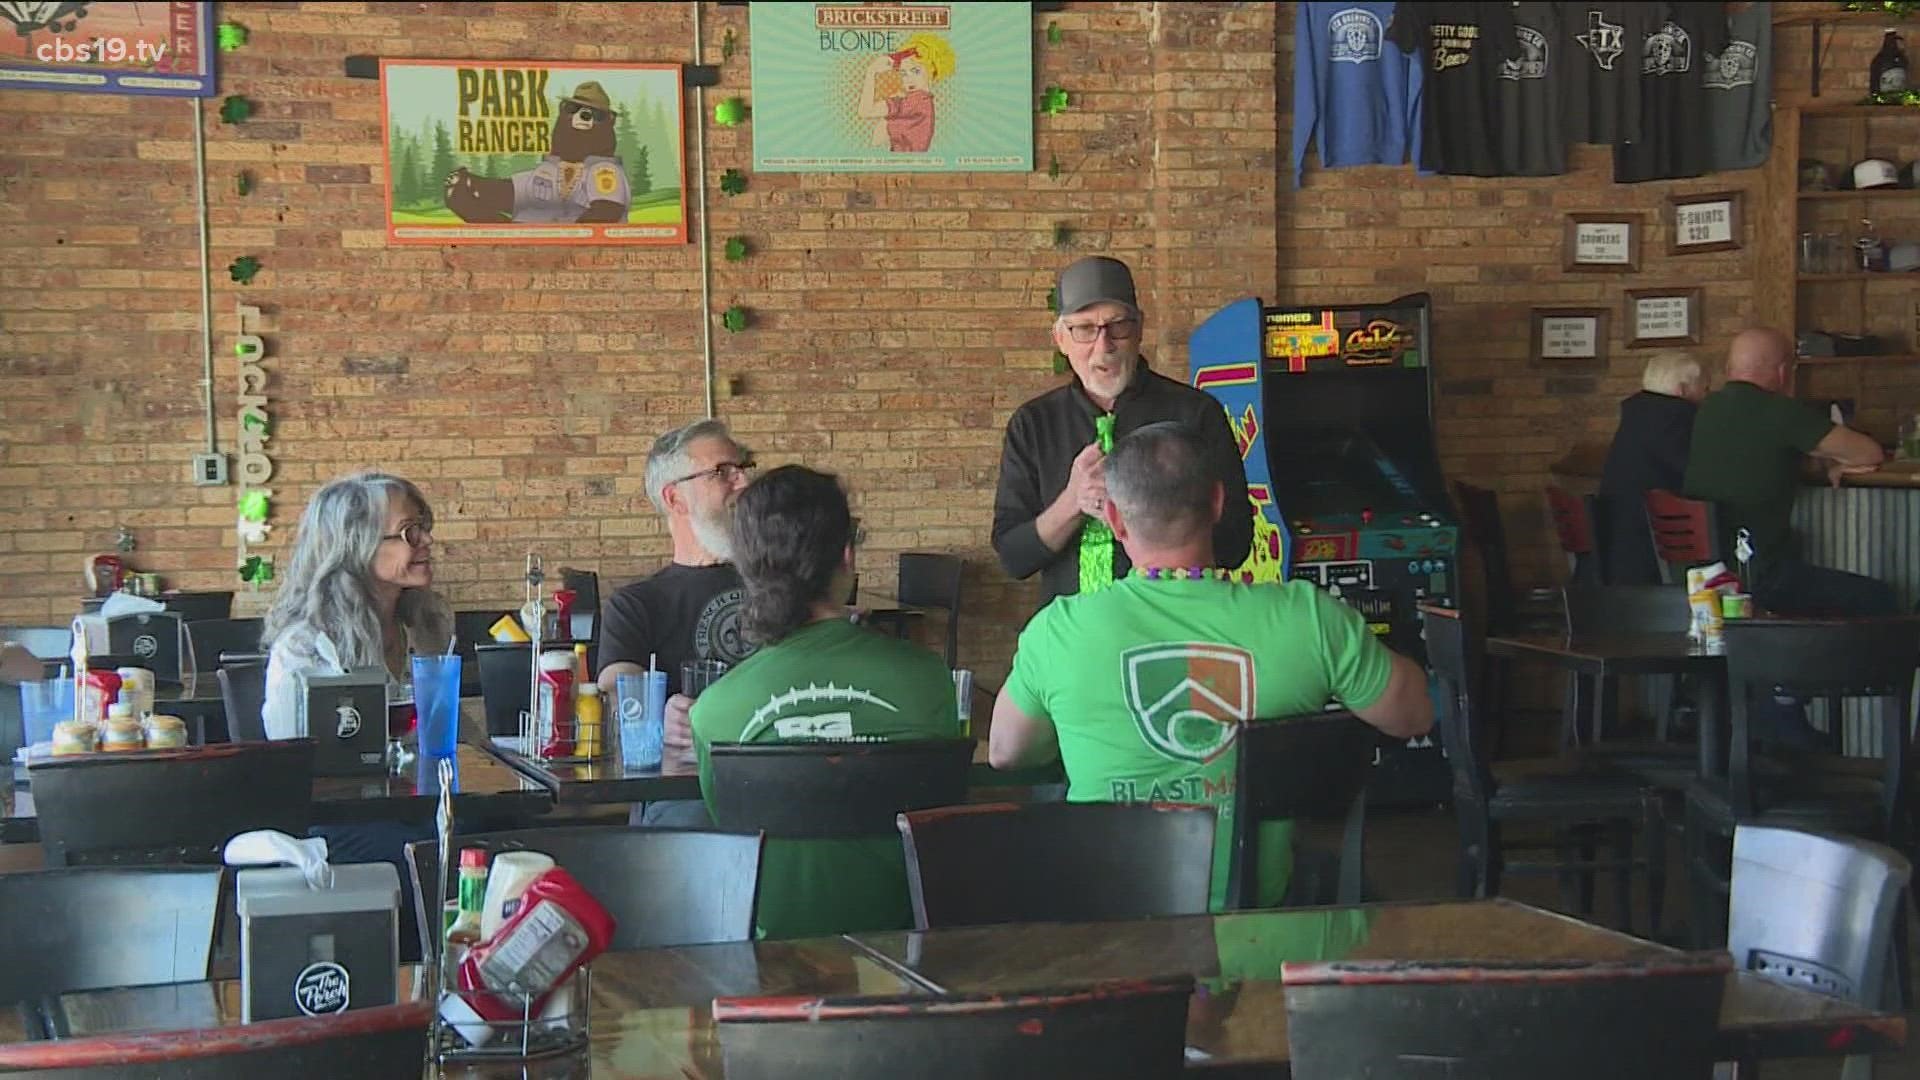 ETX Brewery Co says they're excited for the return of St. Patrick's Day at Downtown Tyler.